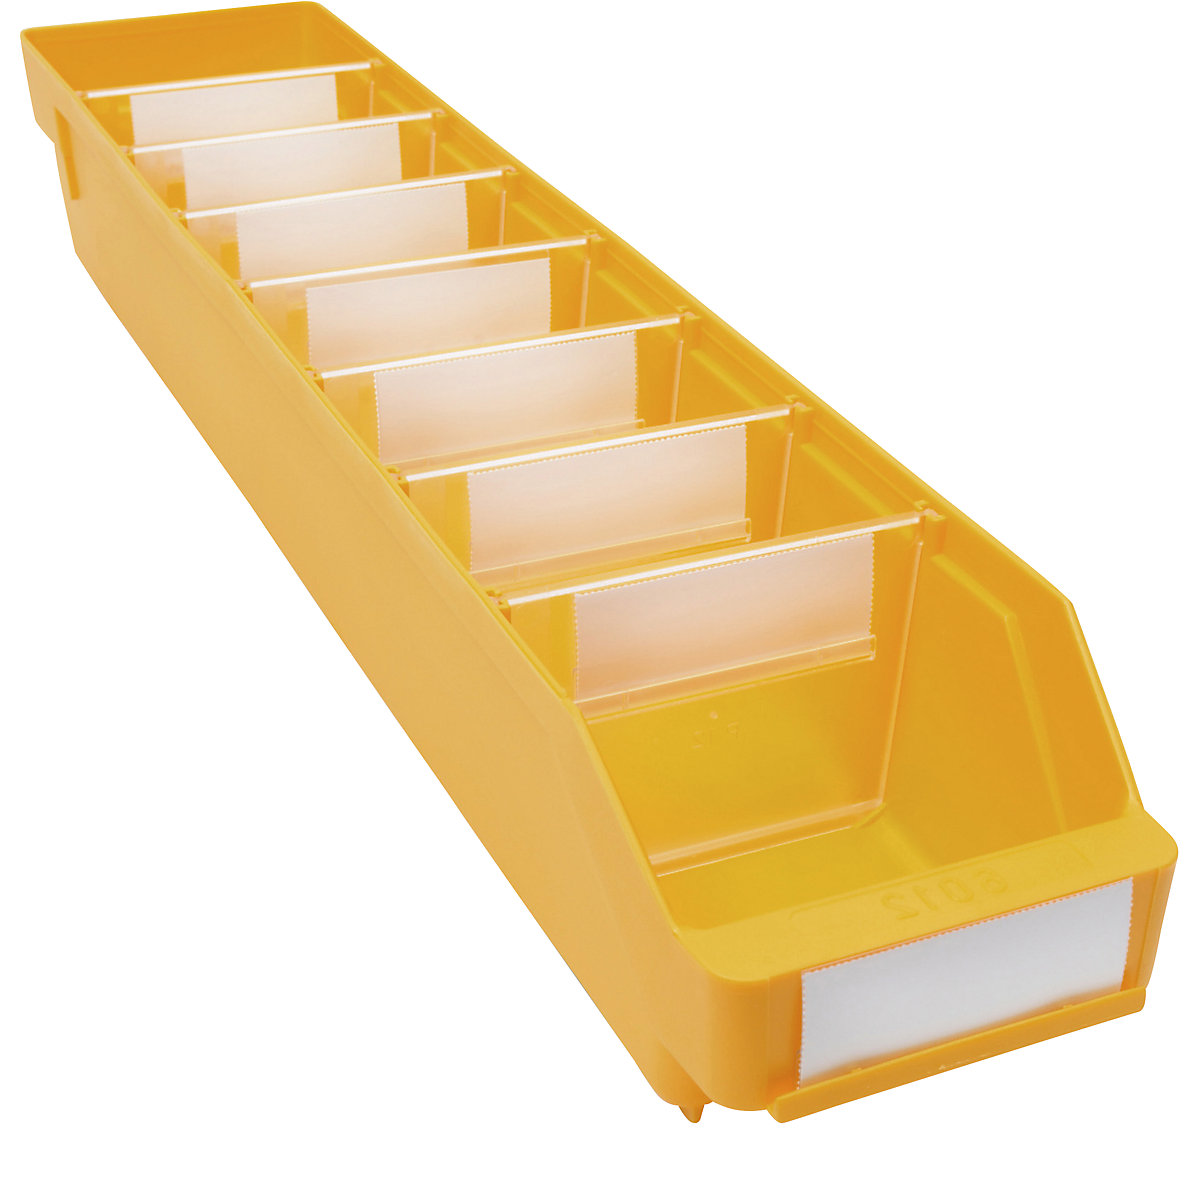 Shelf bin made of highly impact resistant polypropylene – STEMO, yellow, LxWxH 600 x 118 x 95 mm, pack of 30-18